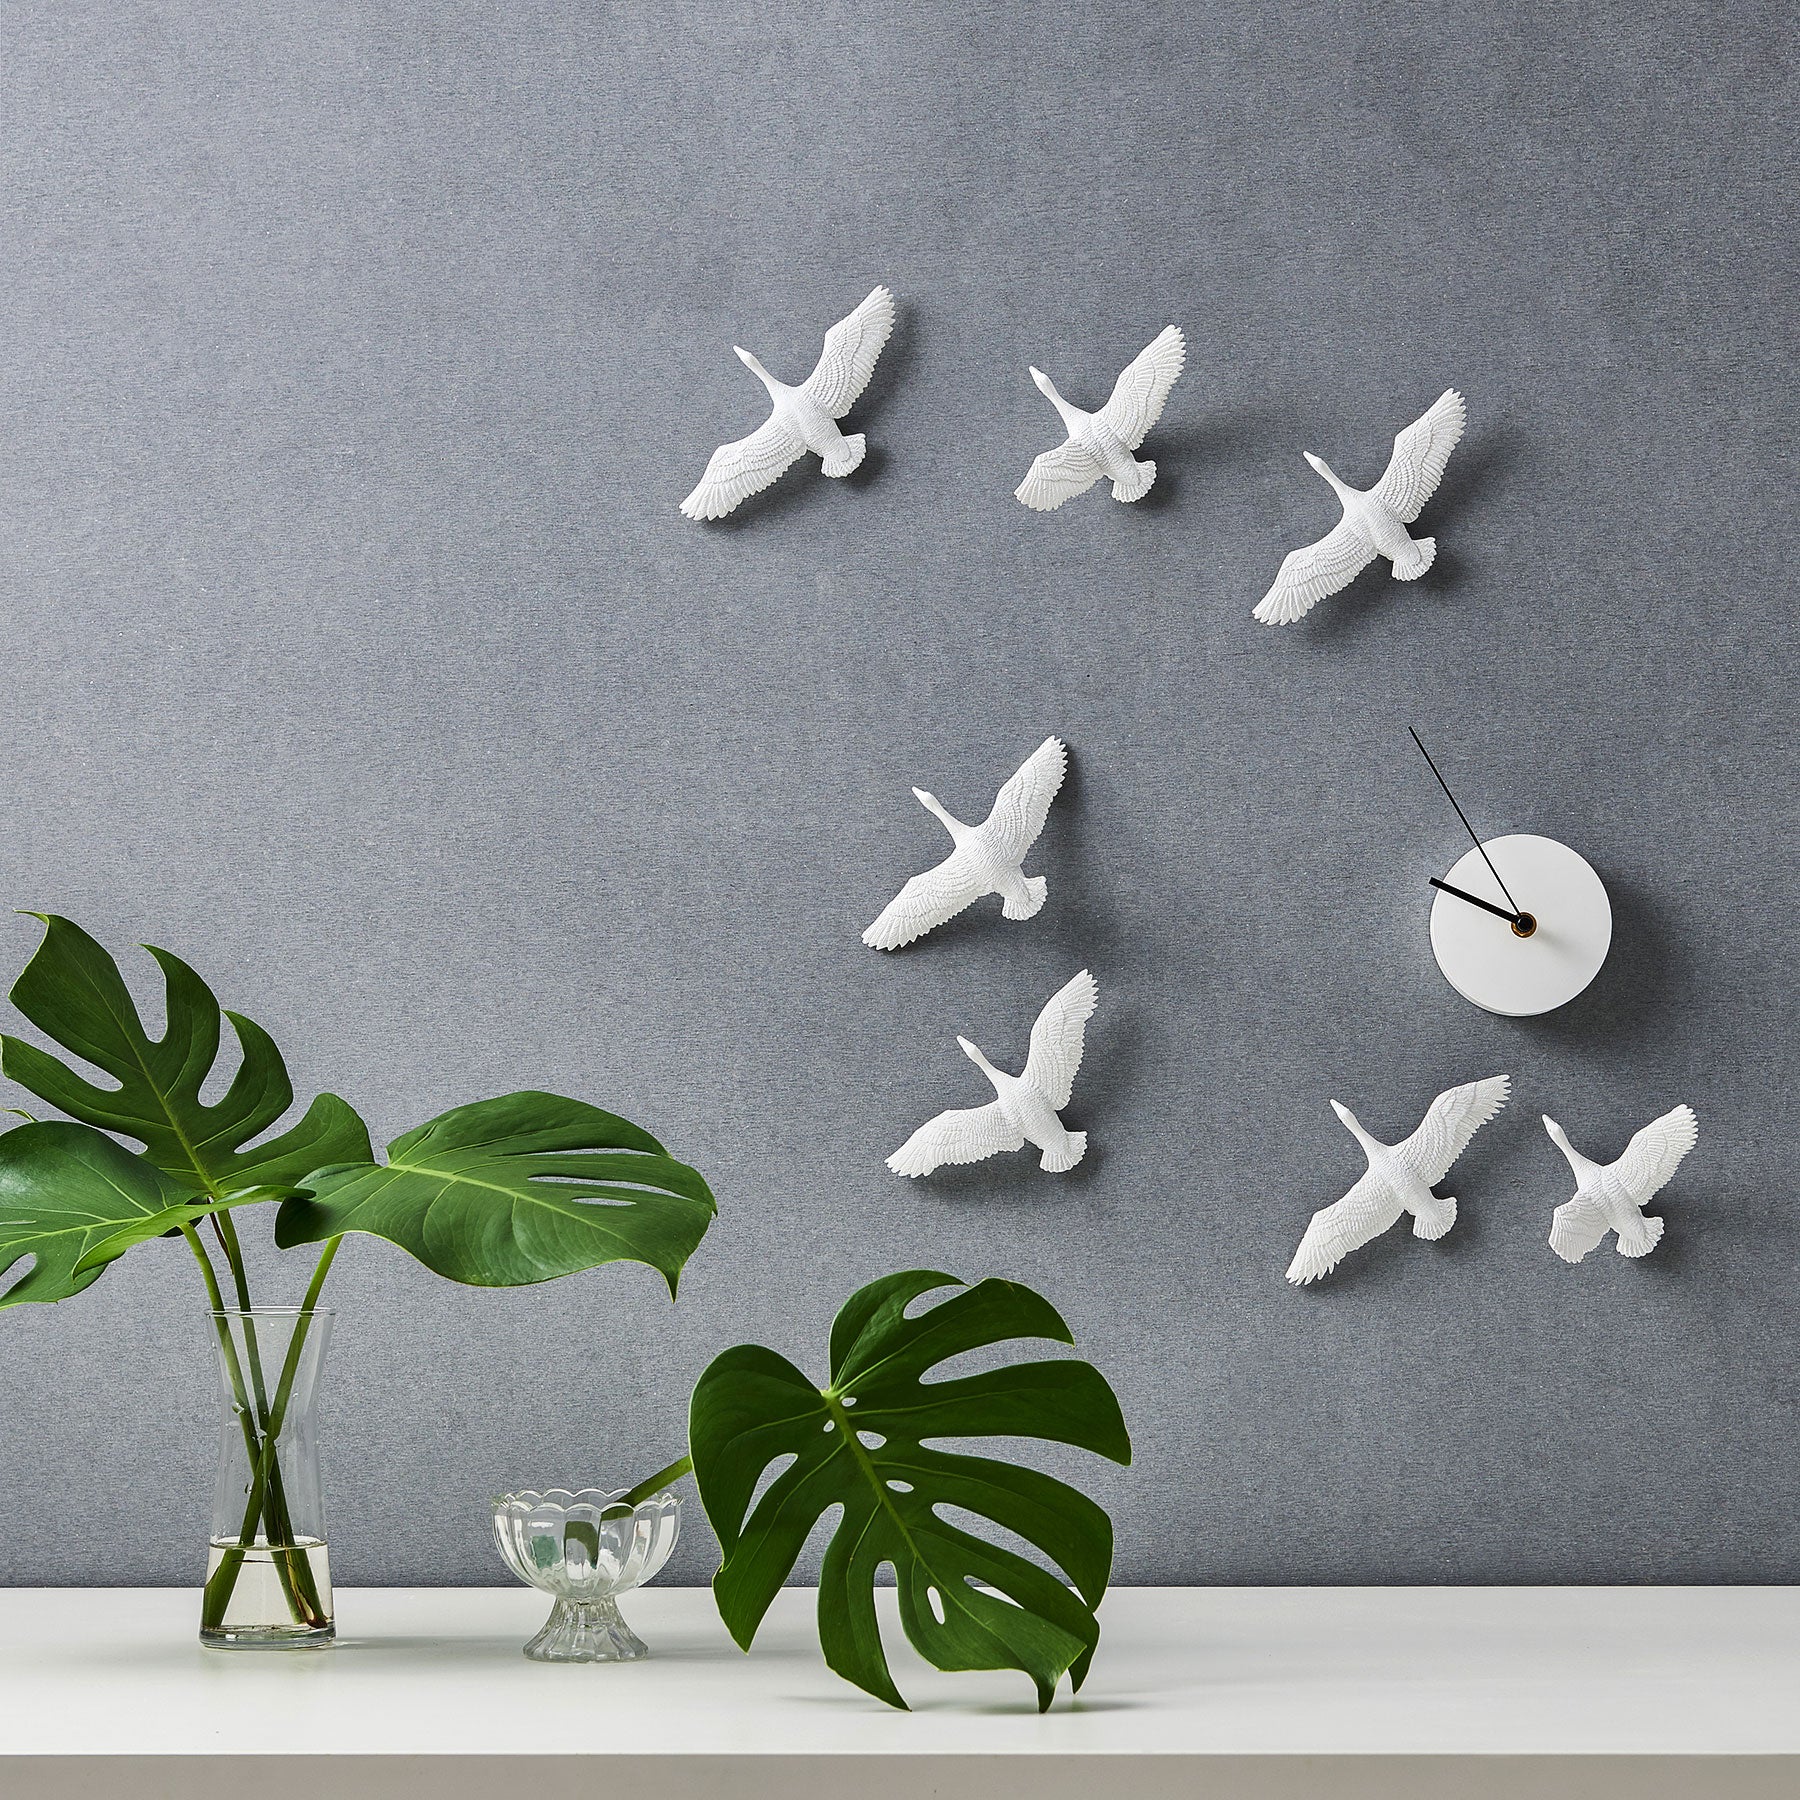 Migratory Birds Minimalist Wall Clock with Resin Sculpture a Philosophical & Modern View of Time